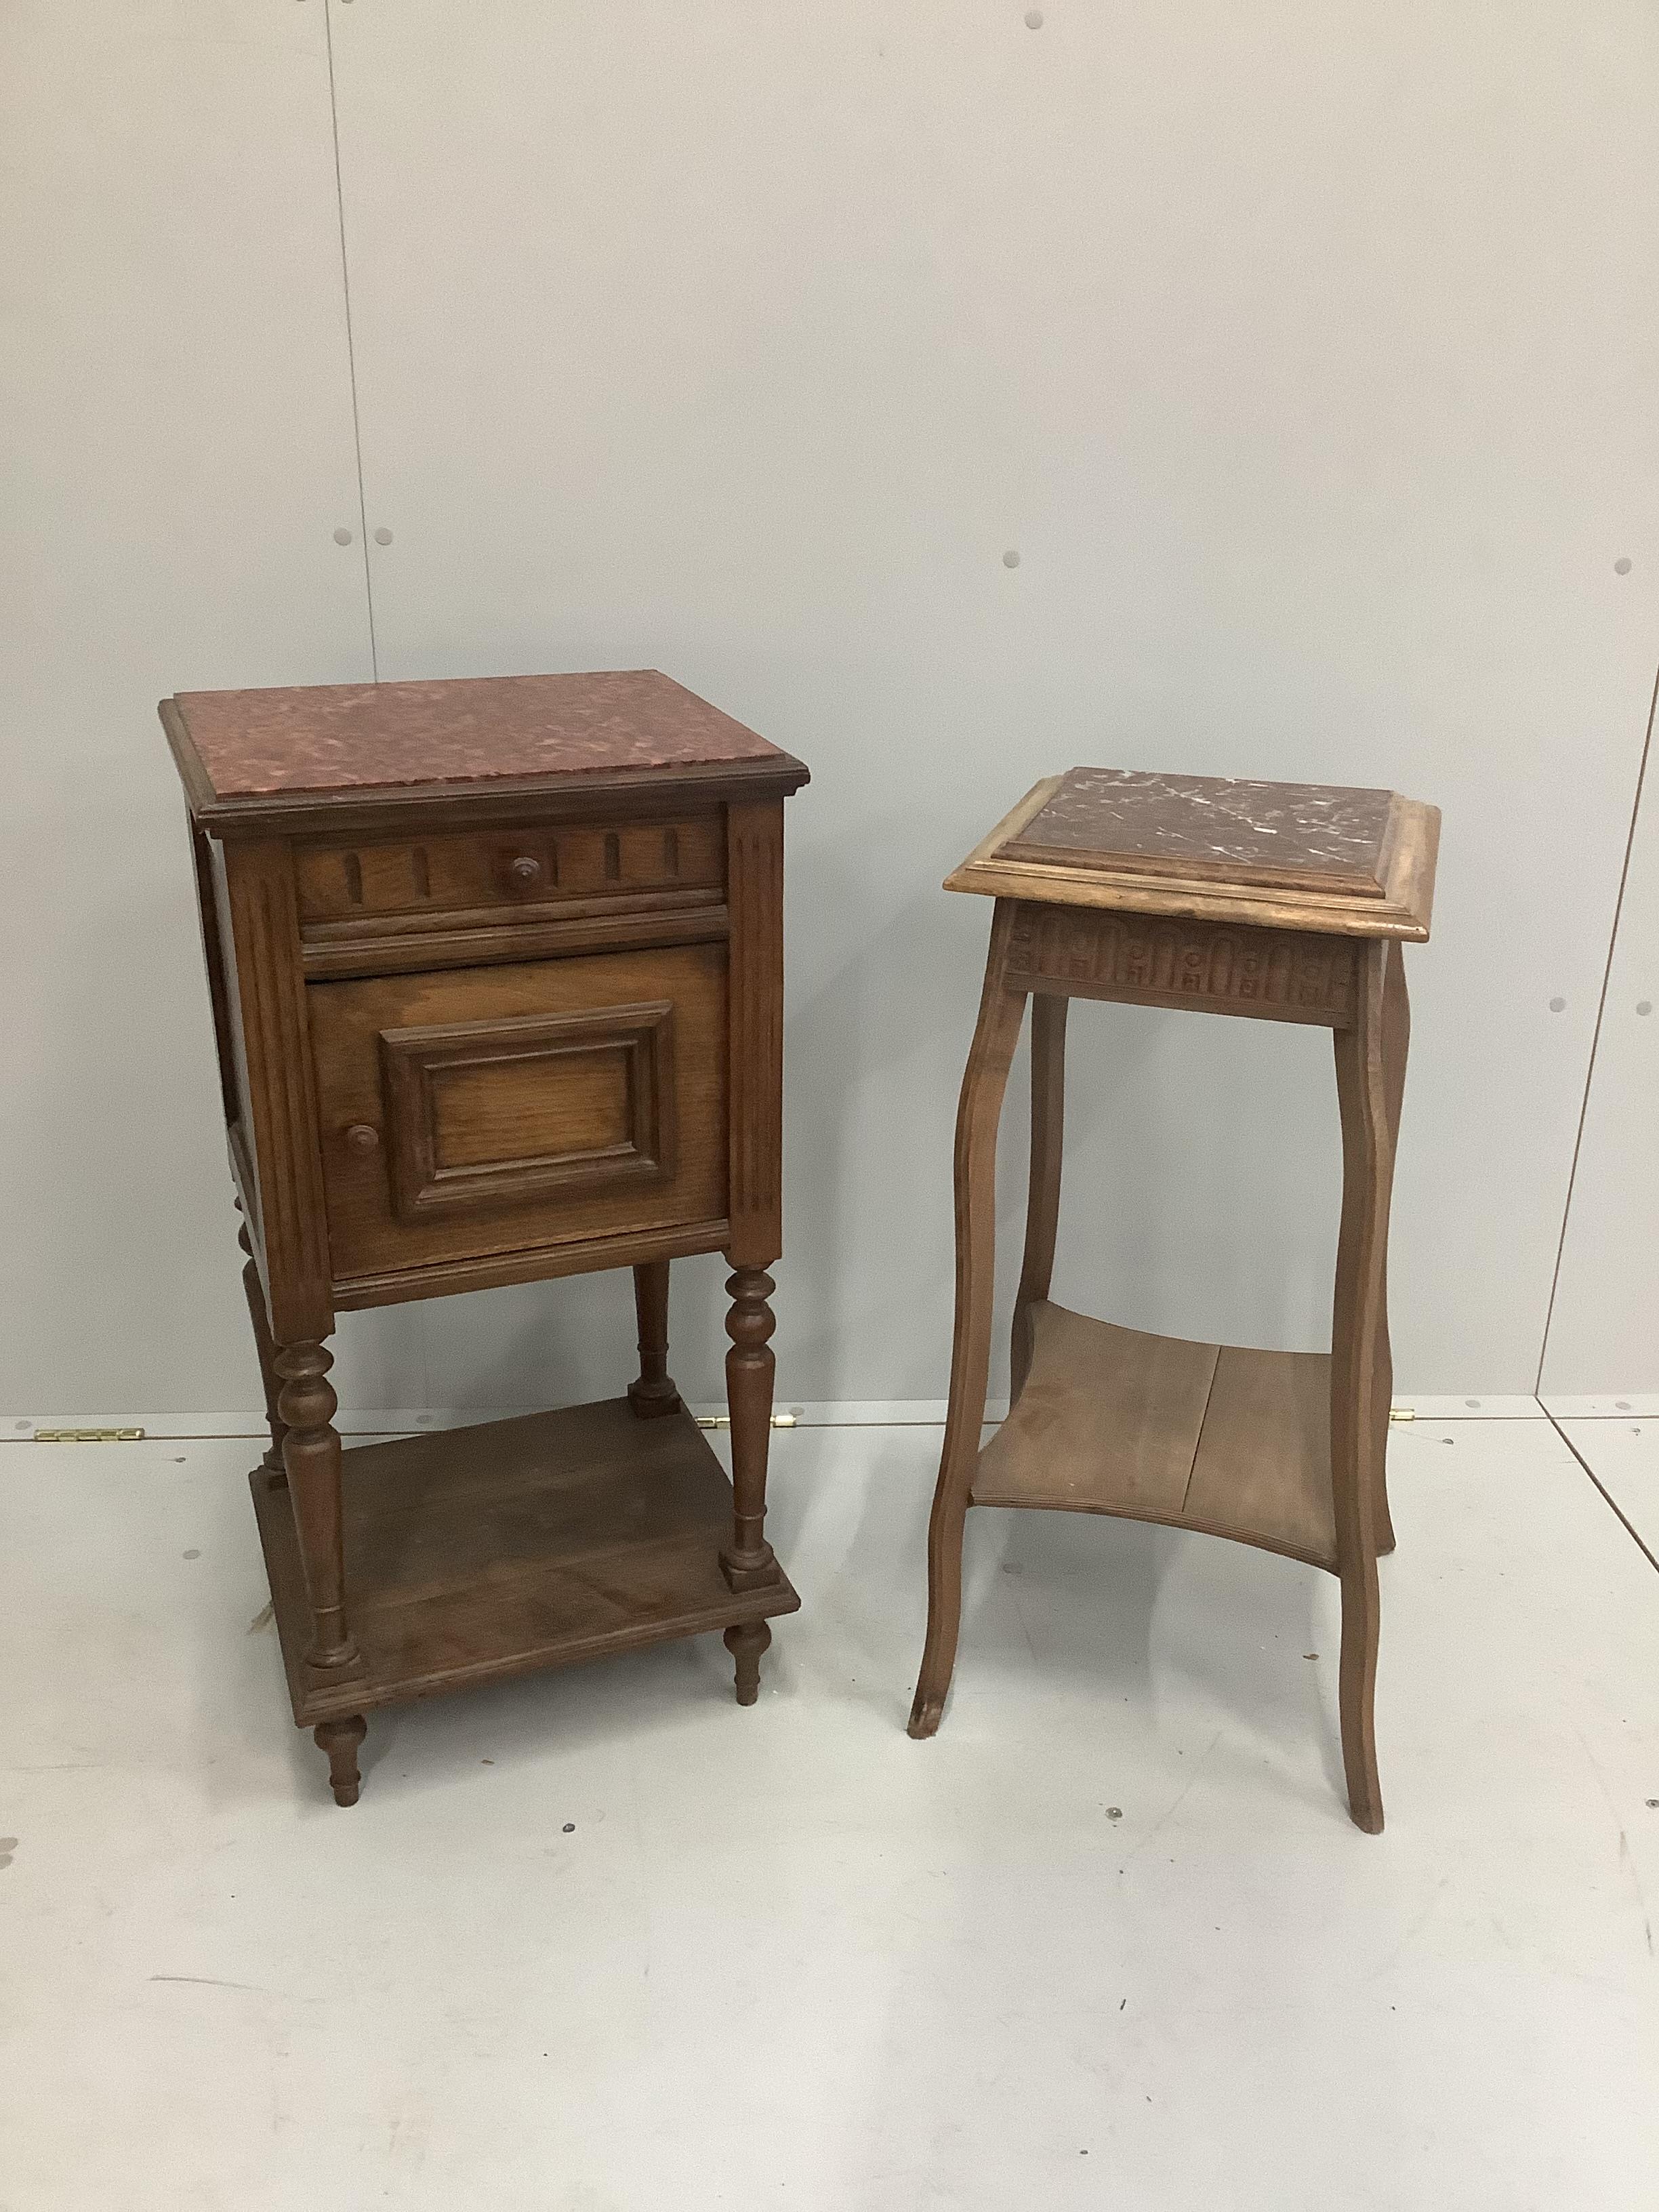 A late 19th century French bedside table and a small occasional table, both with marble tops